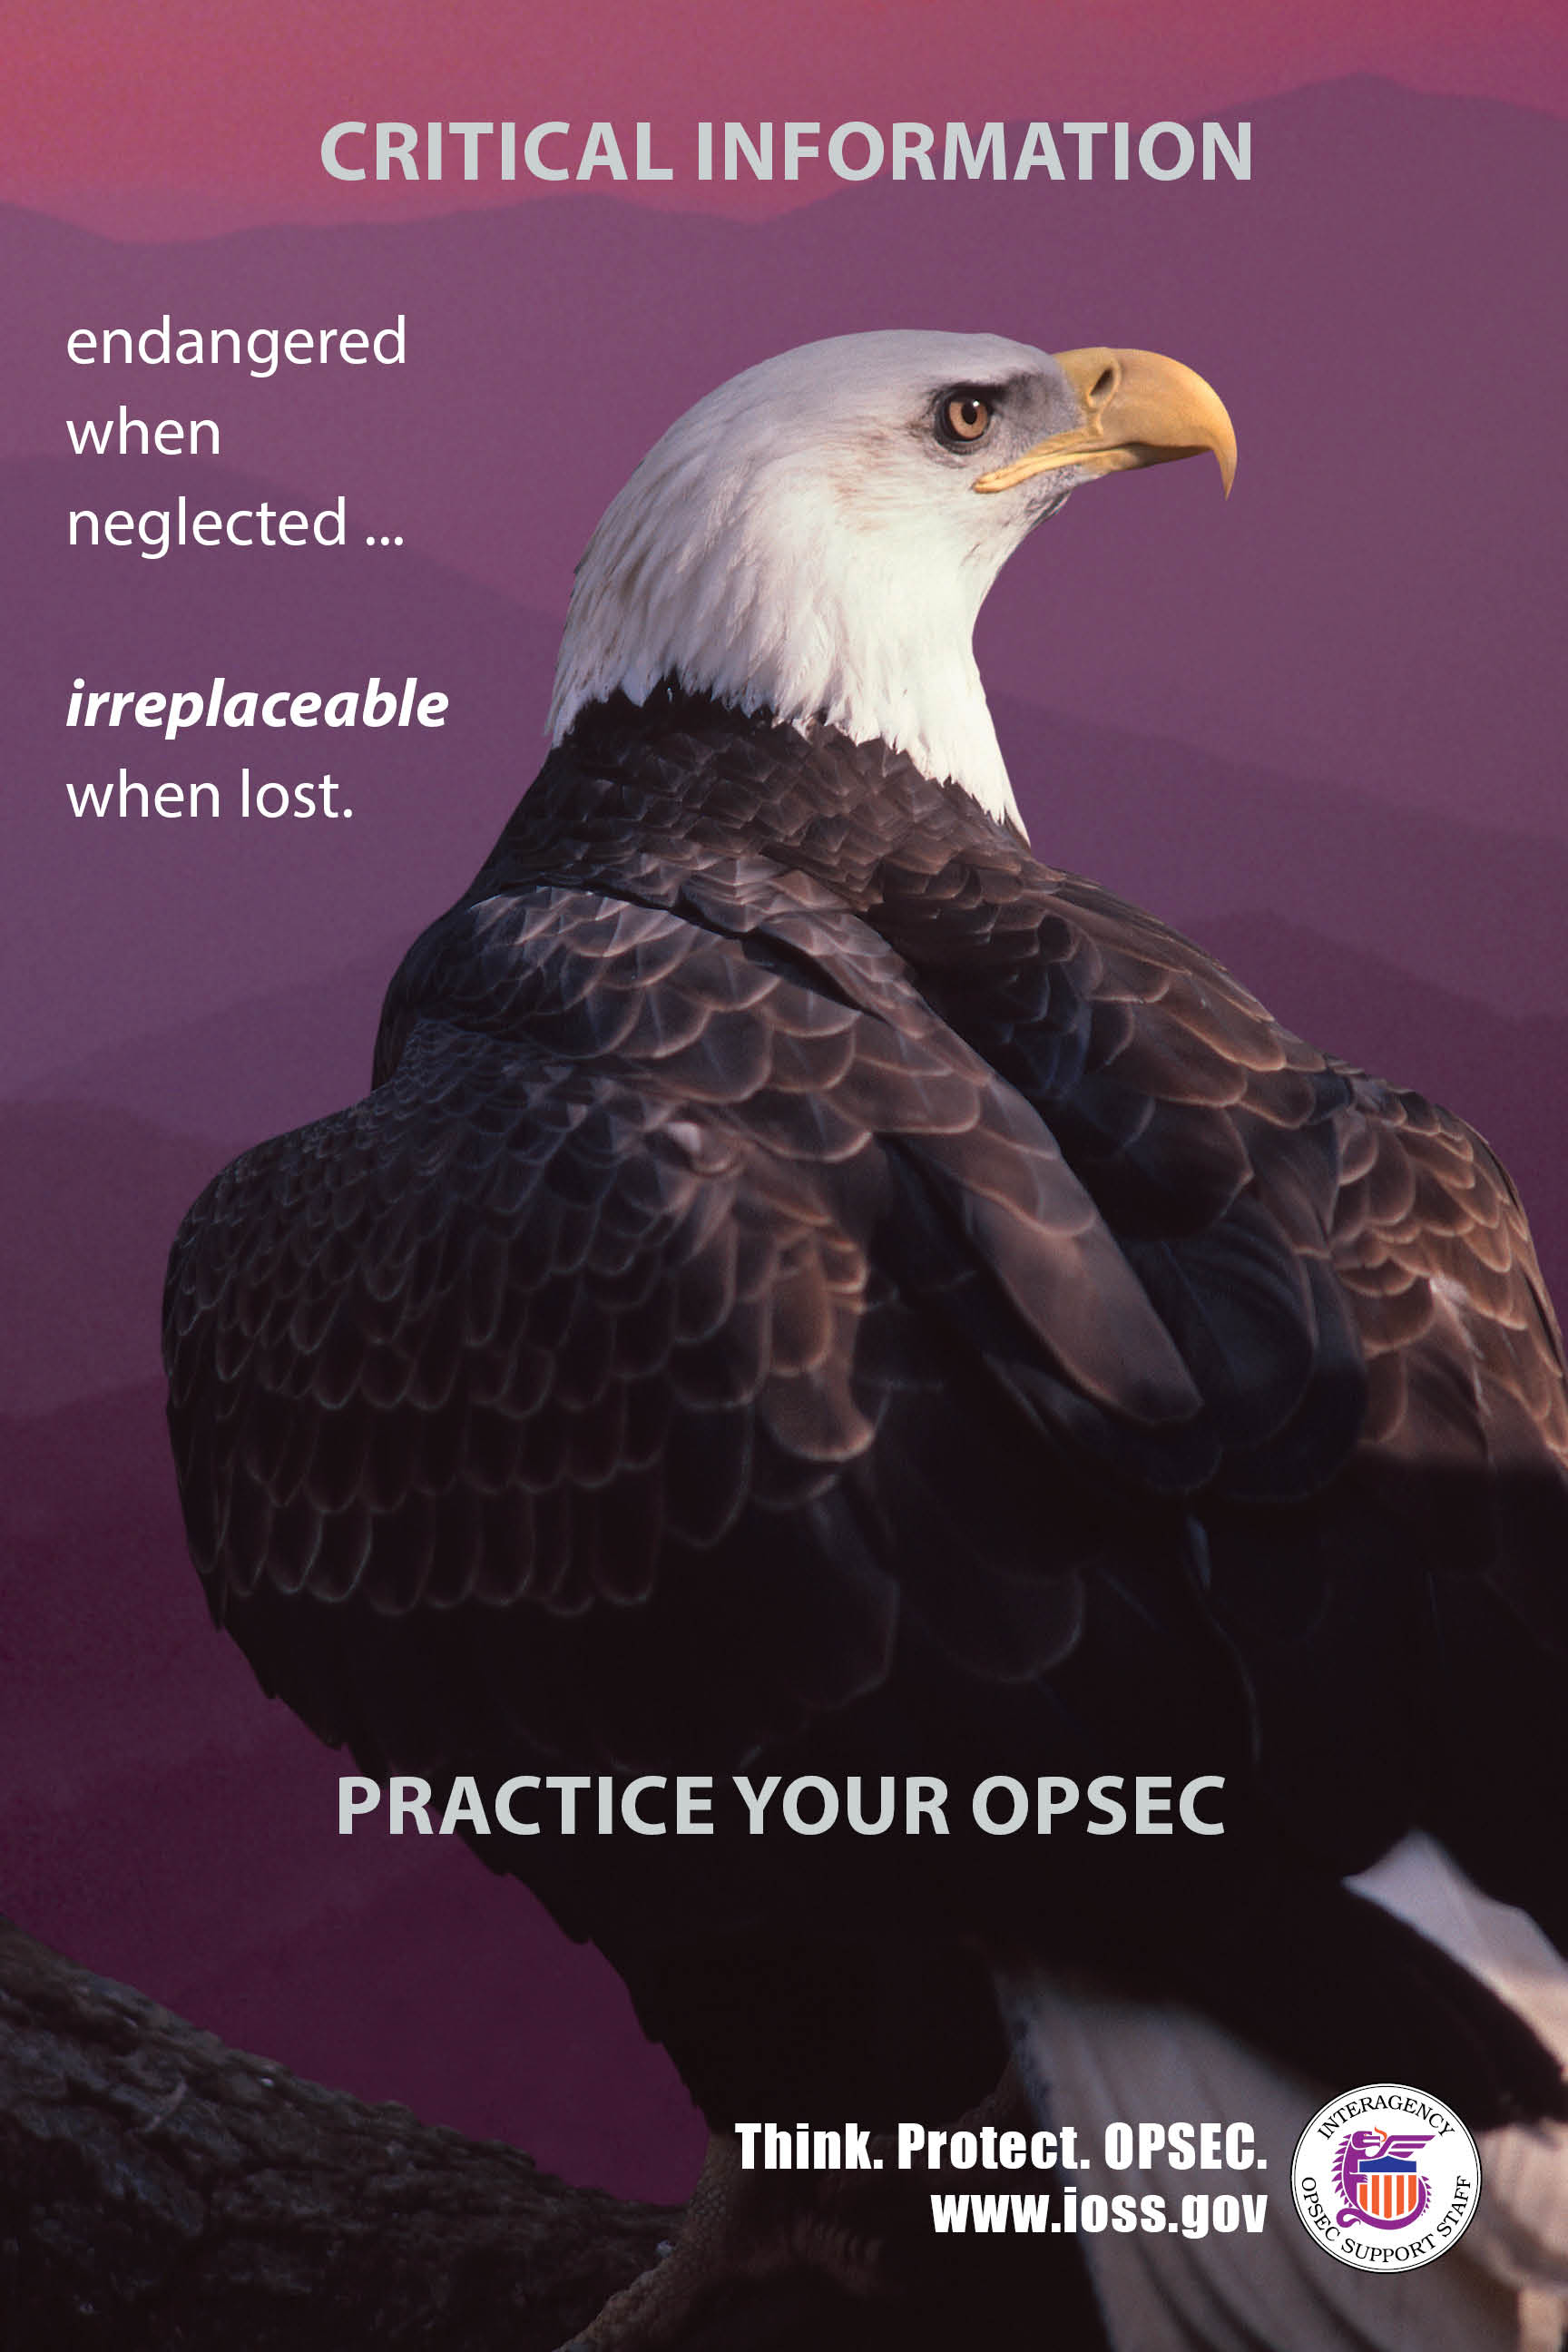 A poster for Protecting OPSEC